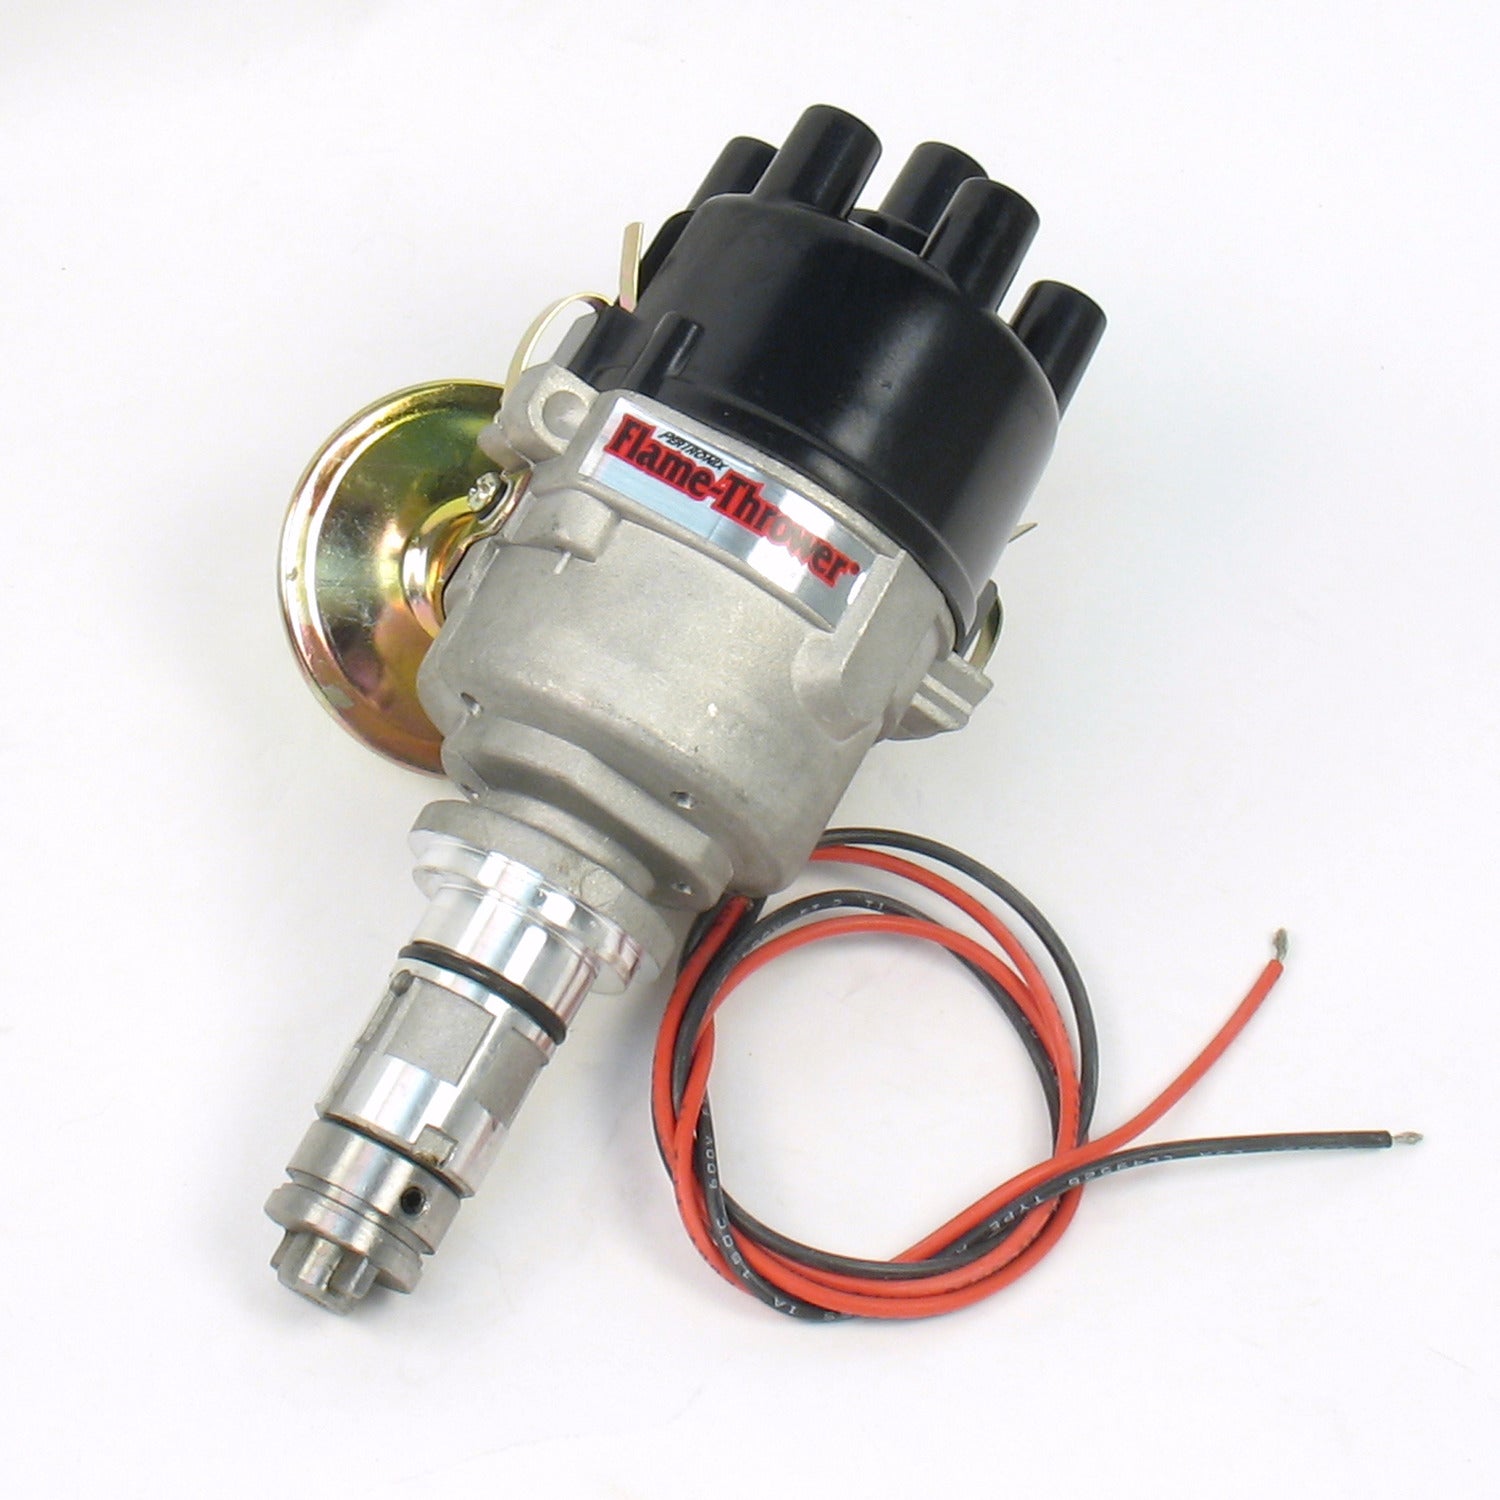 PerTronix D7170618 Flame-Thrower Electronic Distributor Top Exit Cast British A & B Plug and Play with Ignitor III Vac Adv